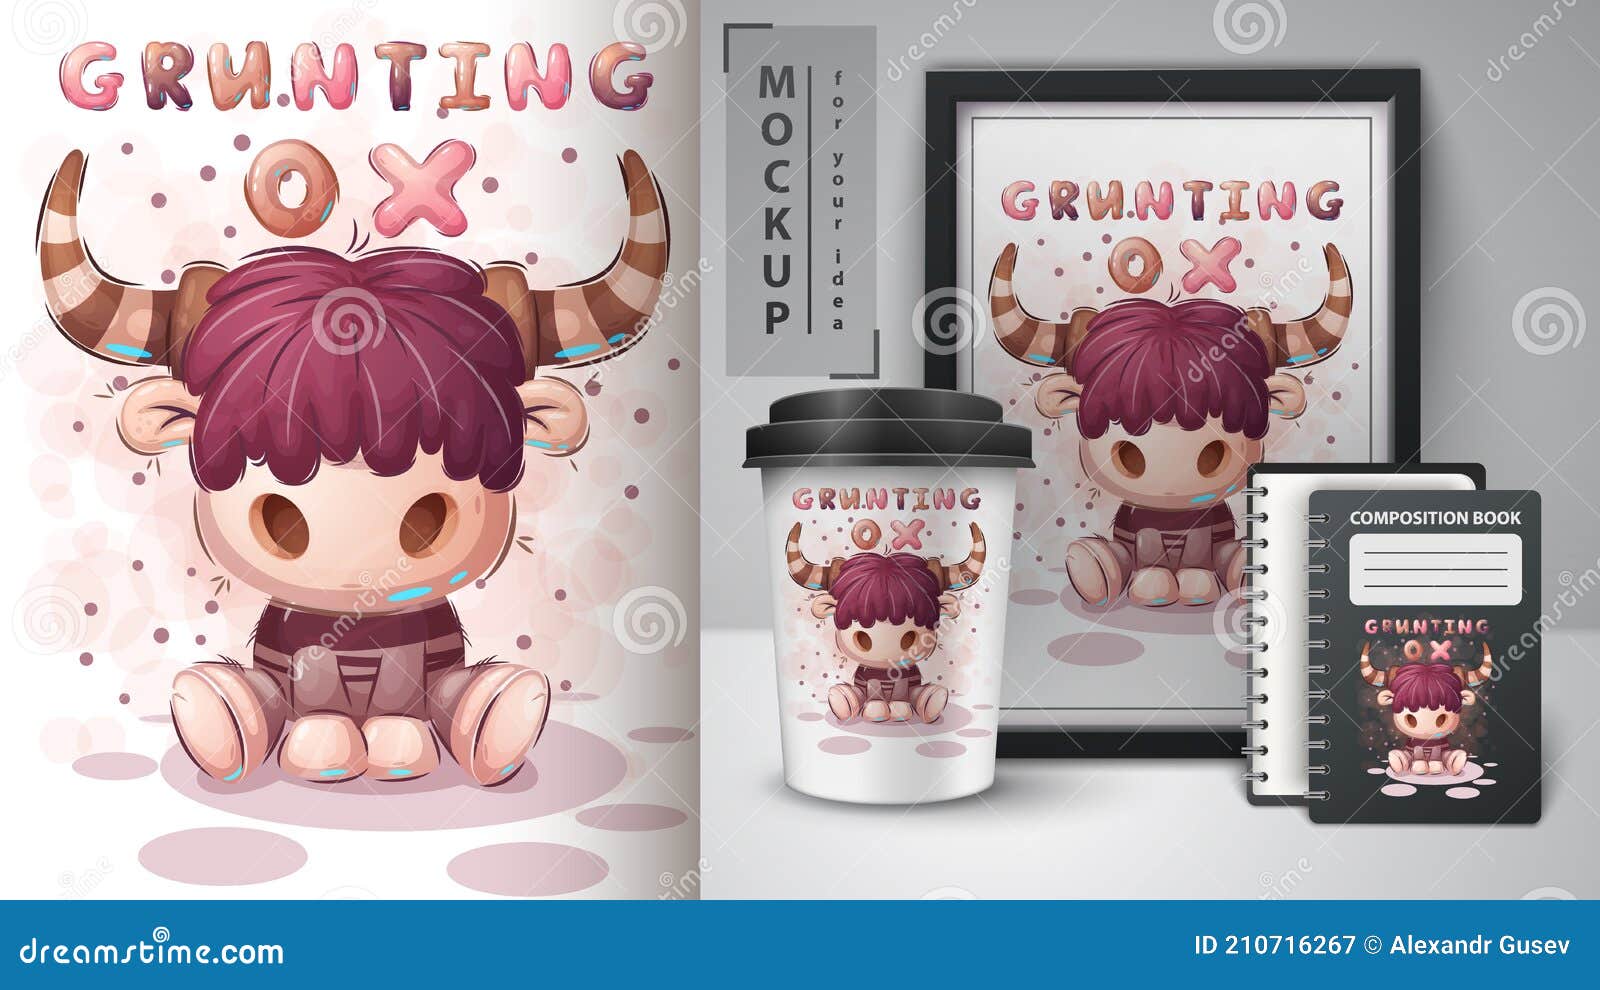 grunting ox - poster and merchandising.